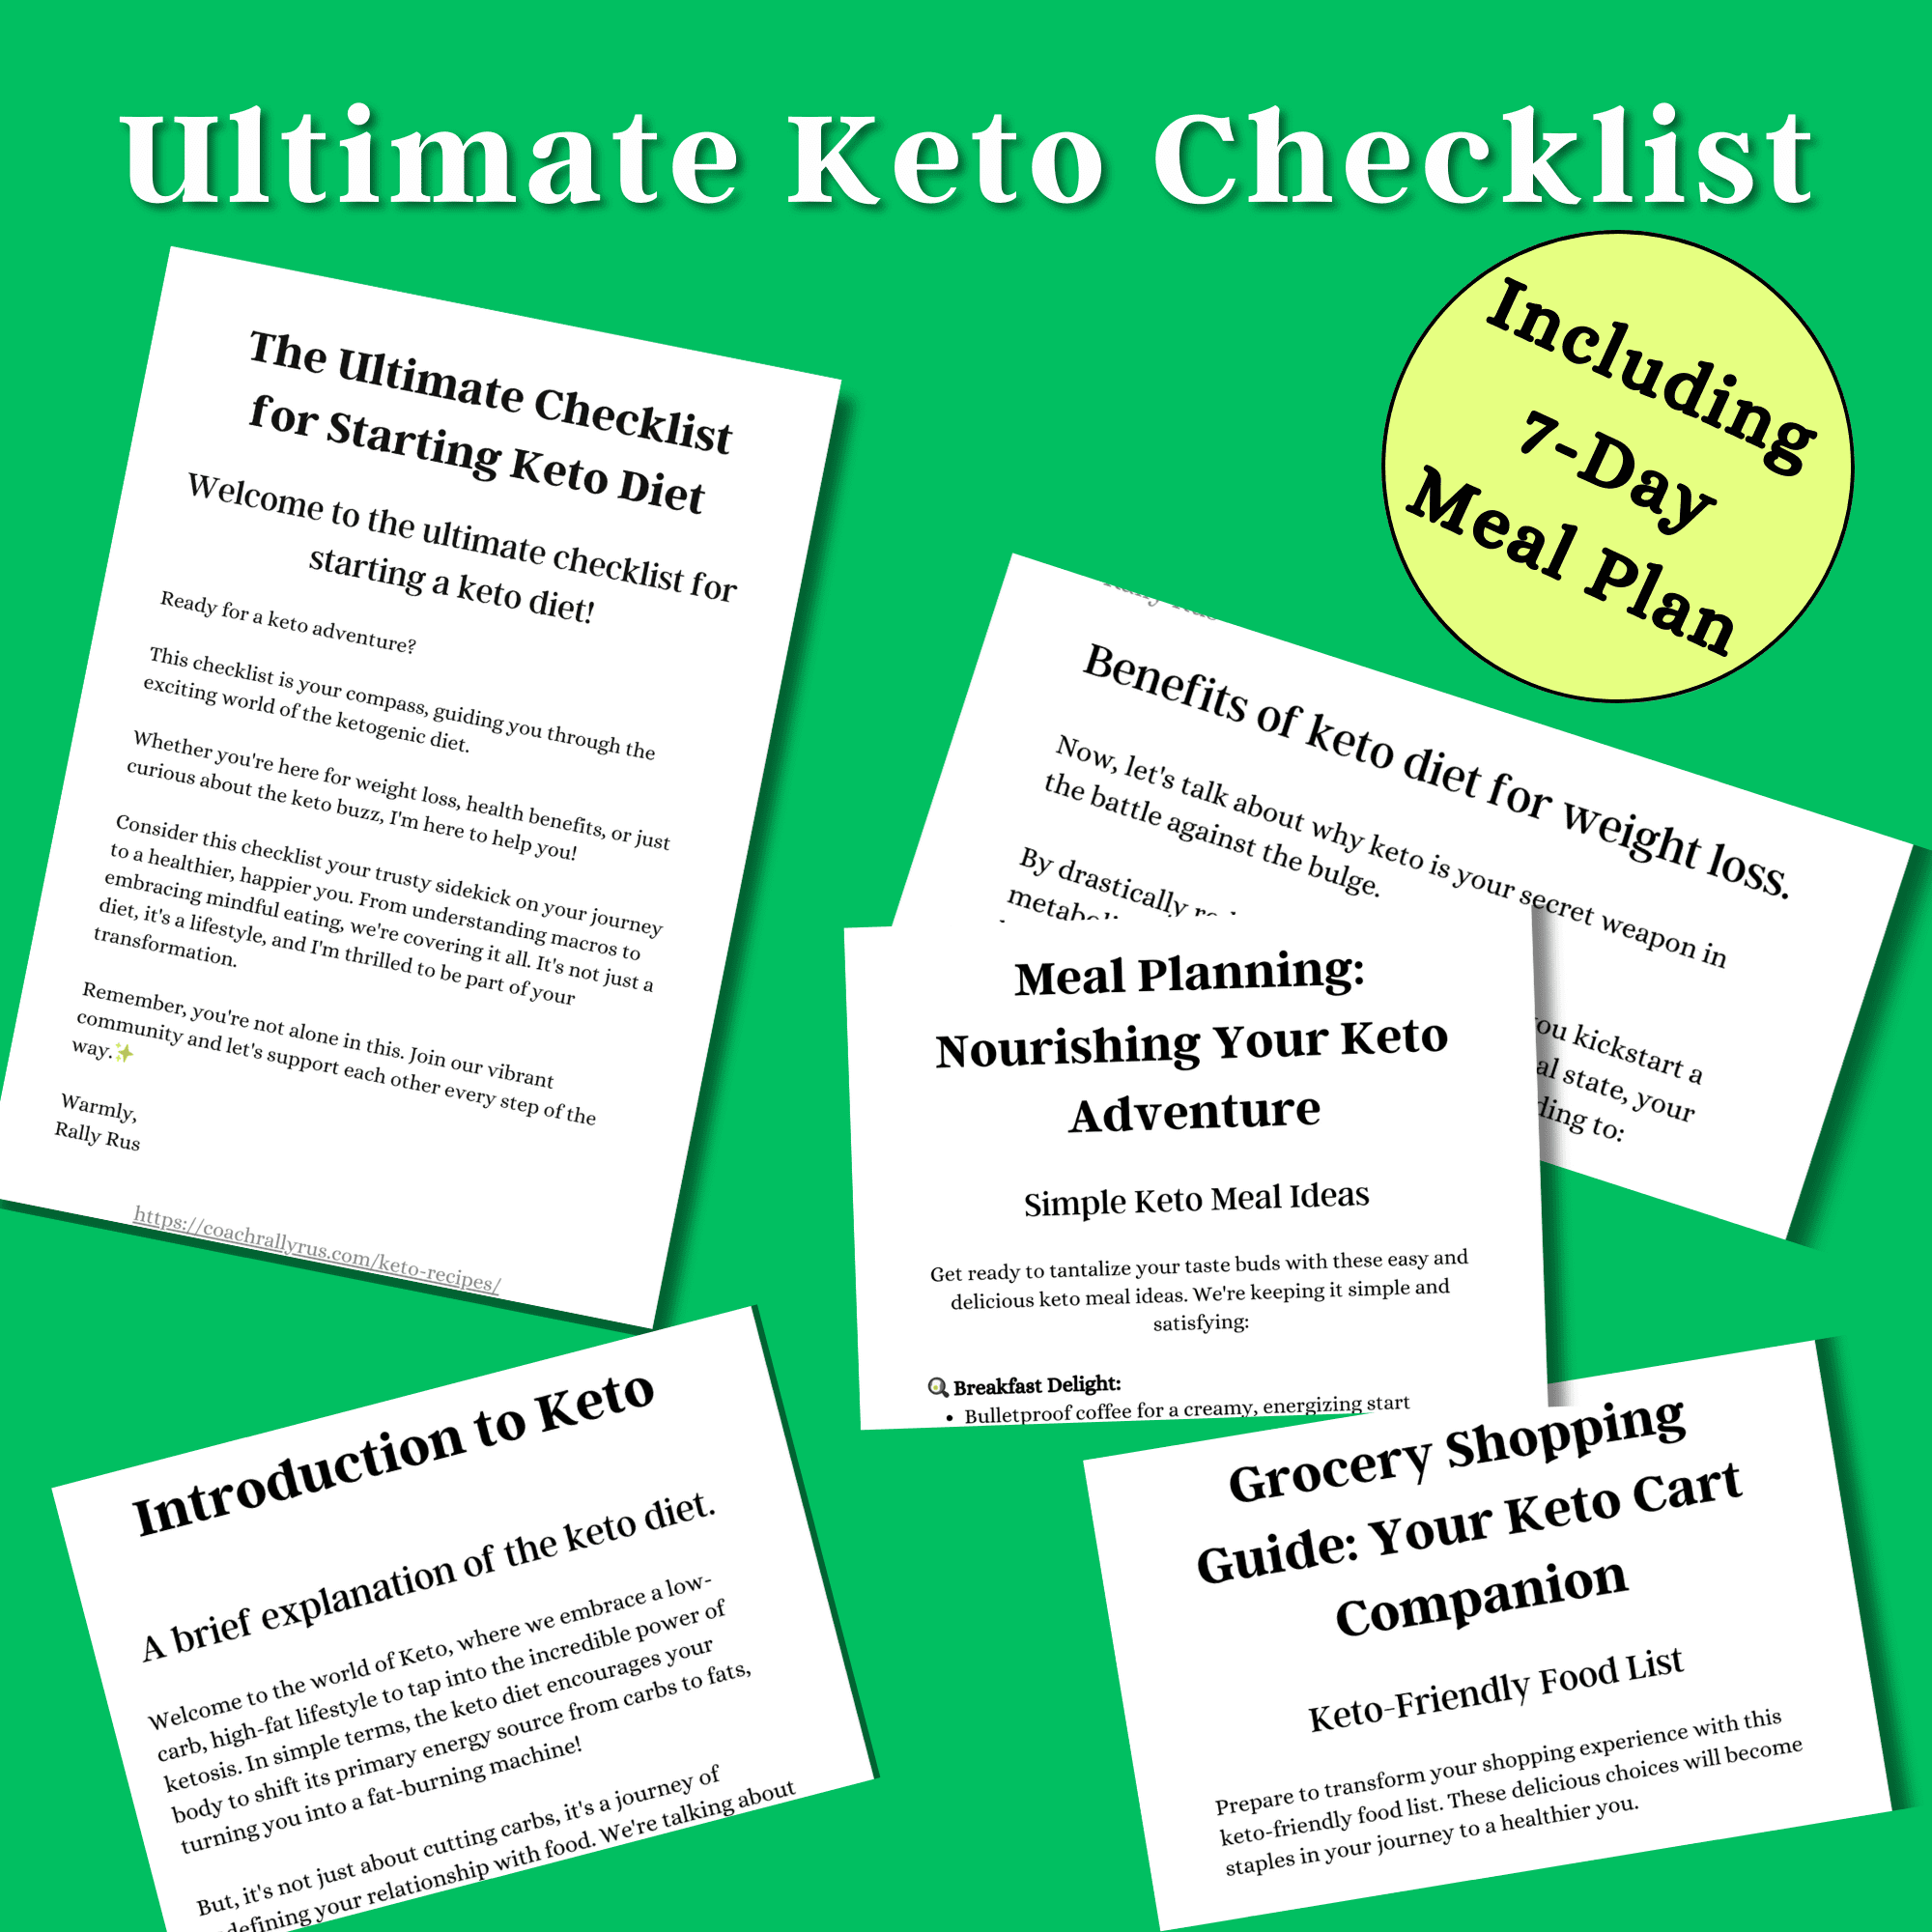 An image of The Ultimate Keto Checklist and samples of different pages from it